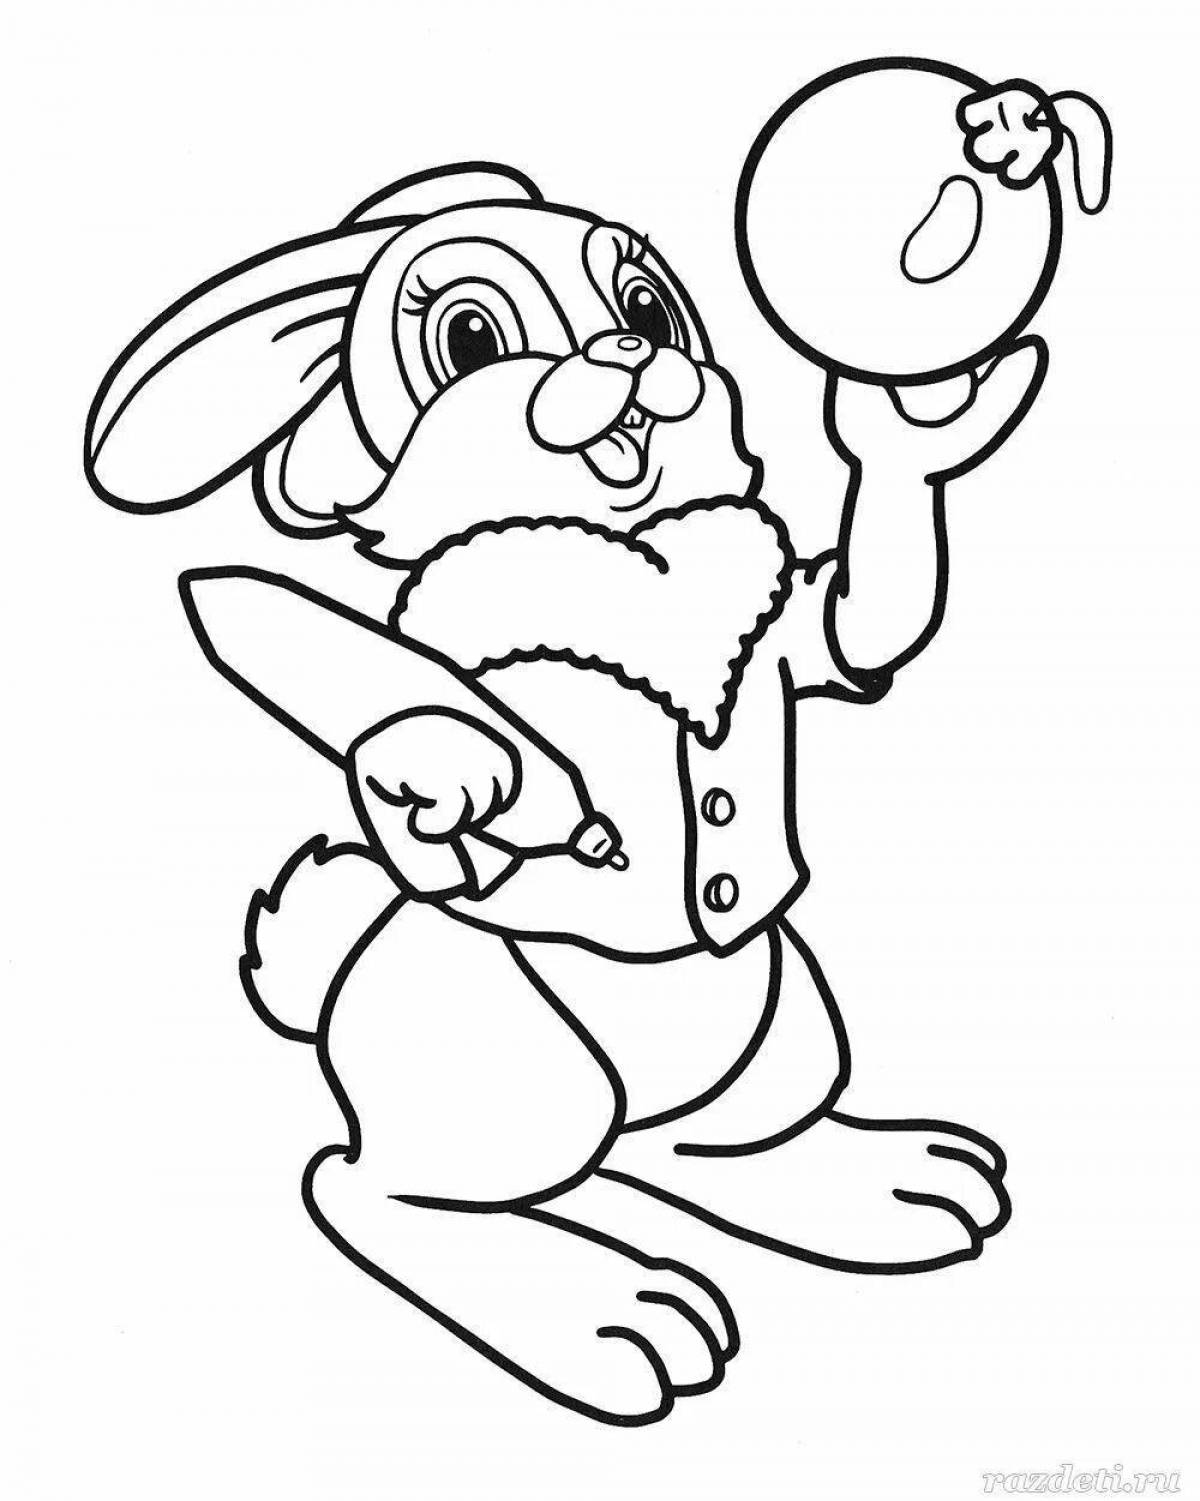 Adorable bunny coloring book with a gift